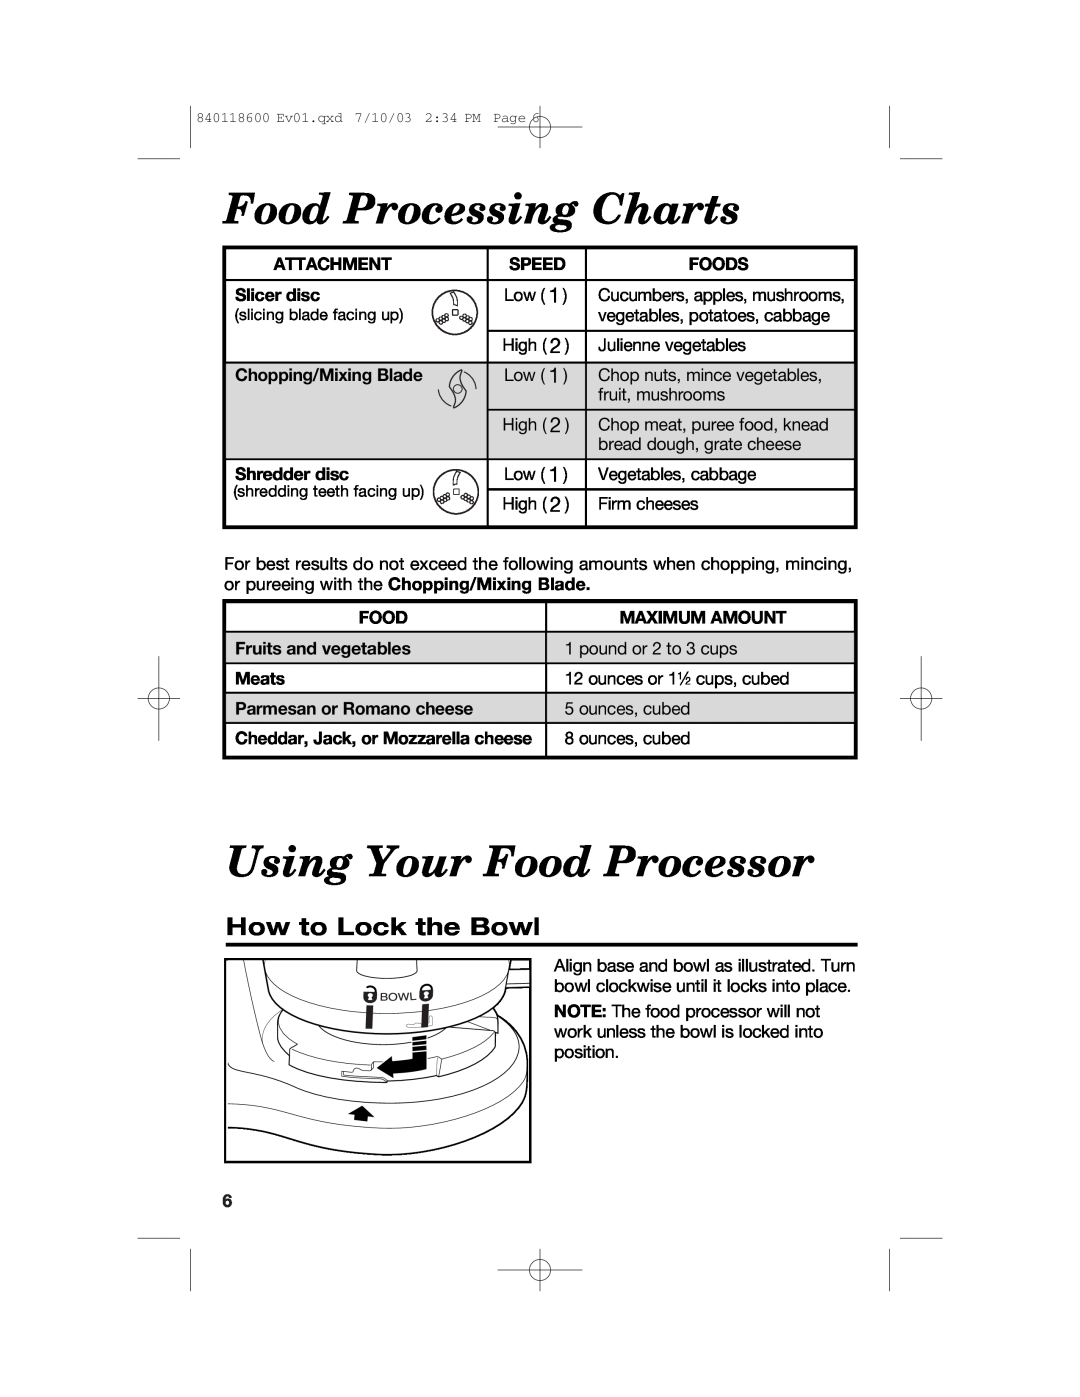 Hamilton Beach 70550RC Food Processing Charts, Using Your Food Processor, How to Lock the Bowl, Attachment, Speed, Foods 